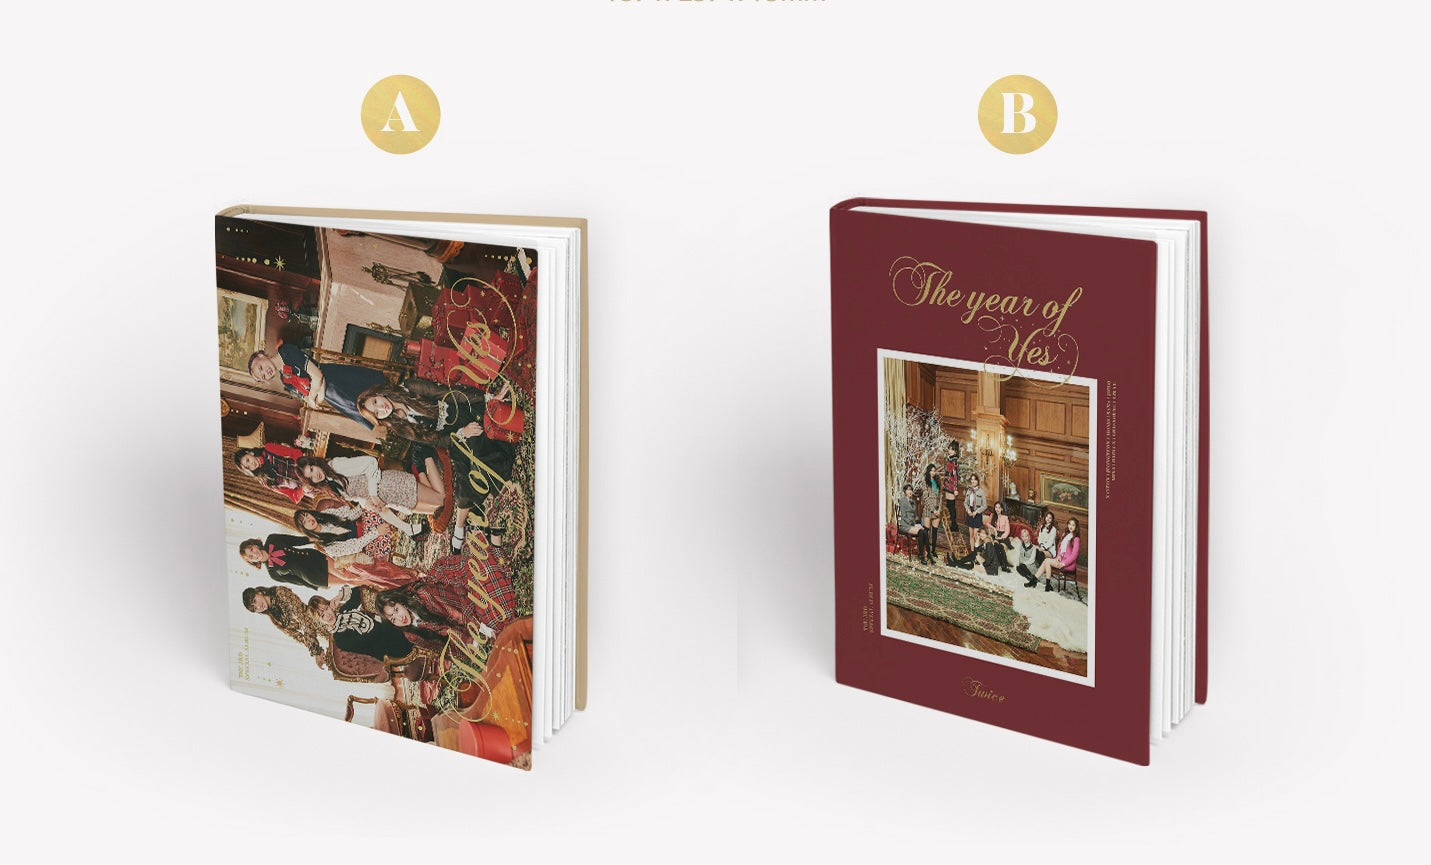 Twice 'The Year of Yes' Album